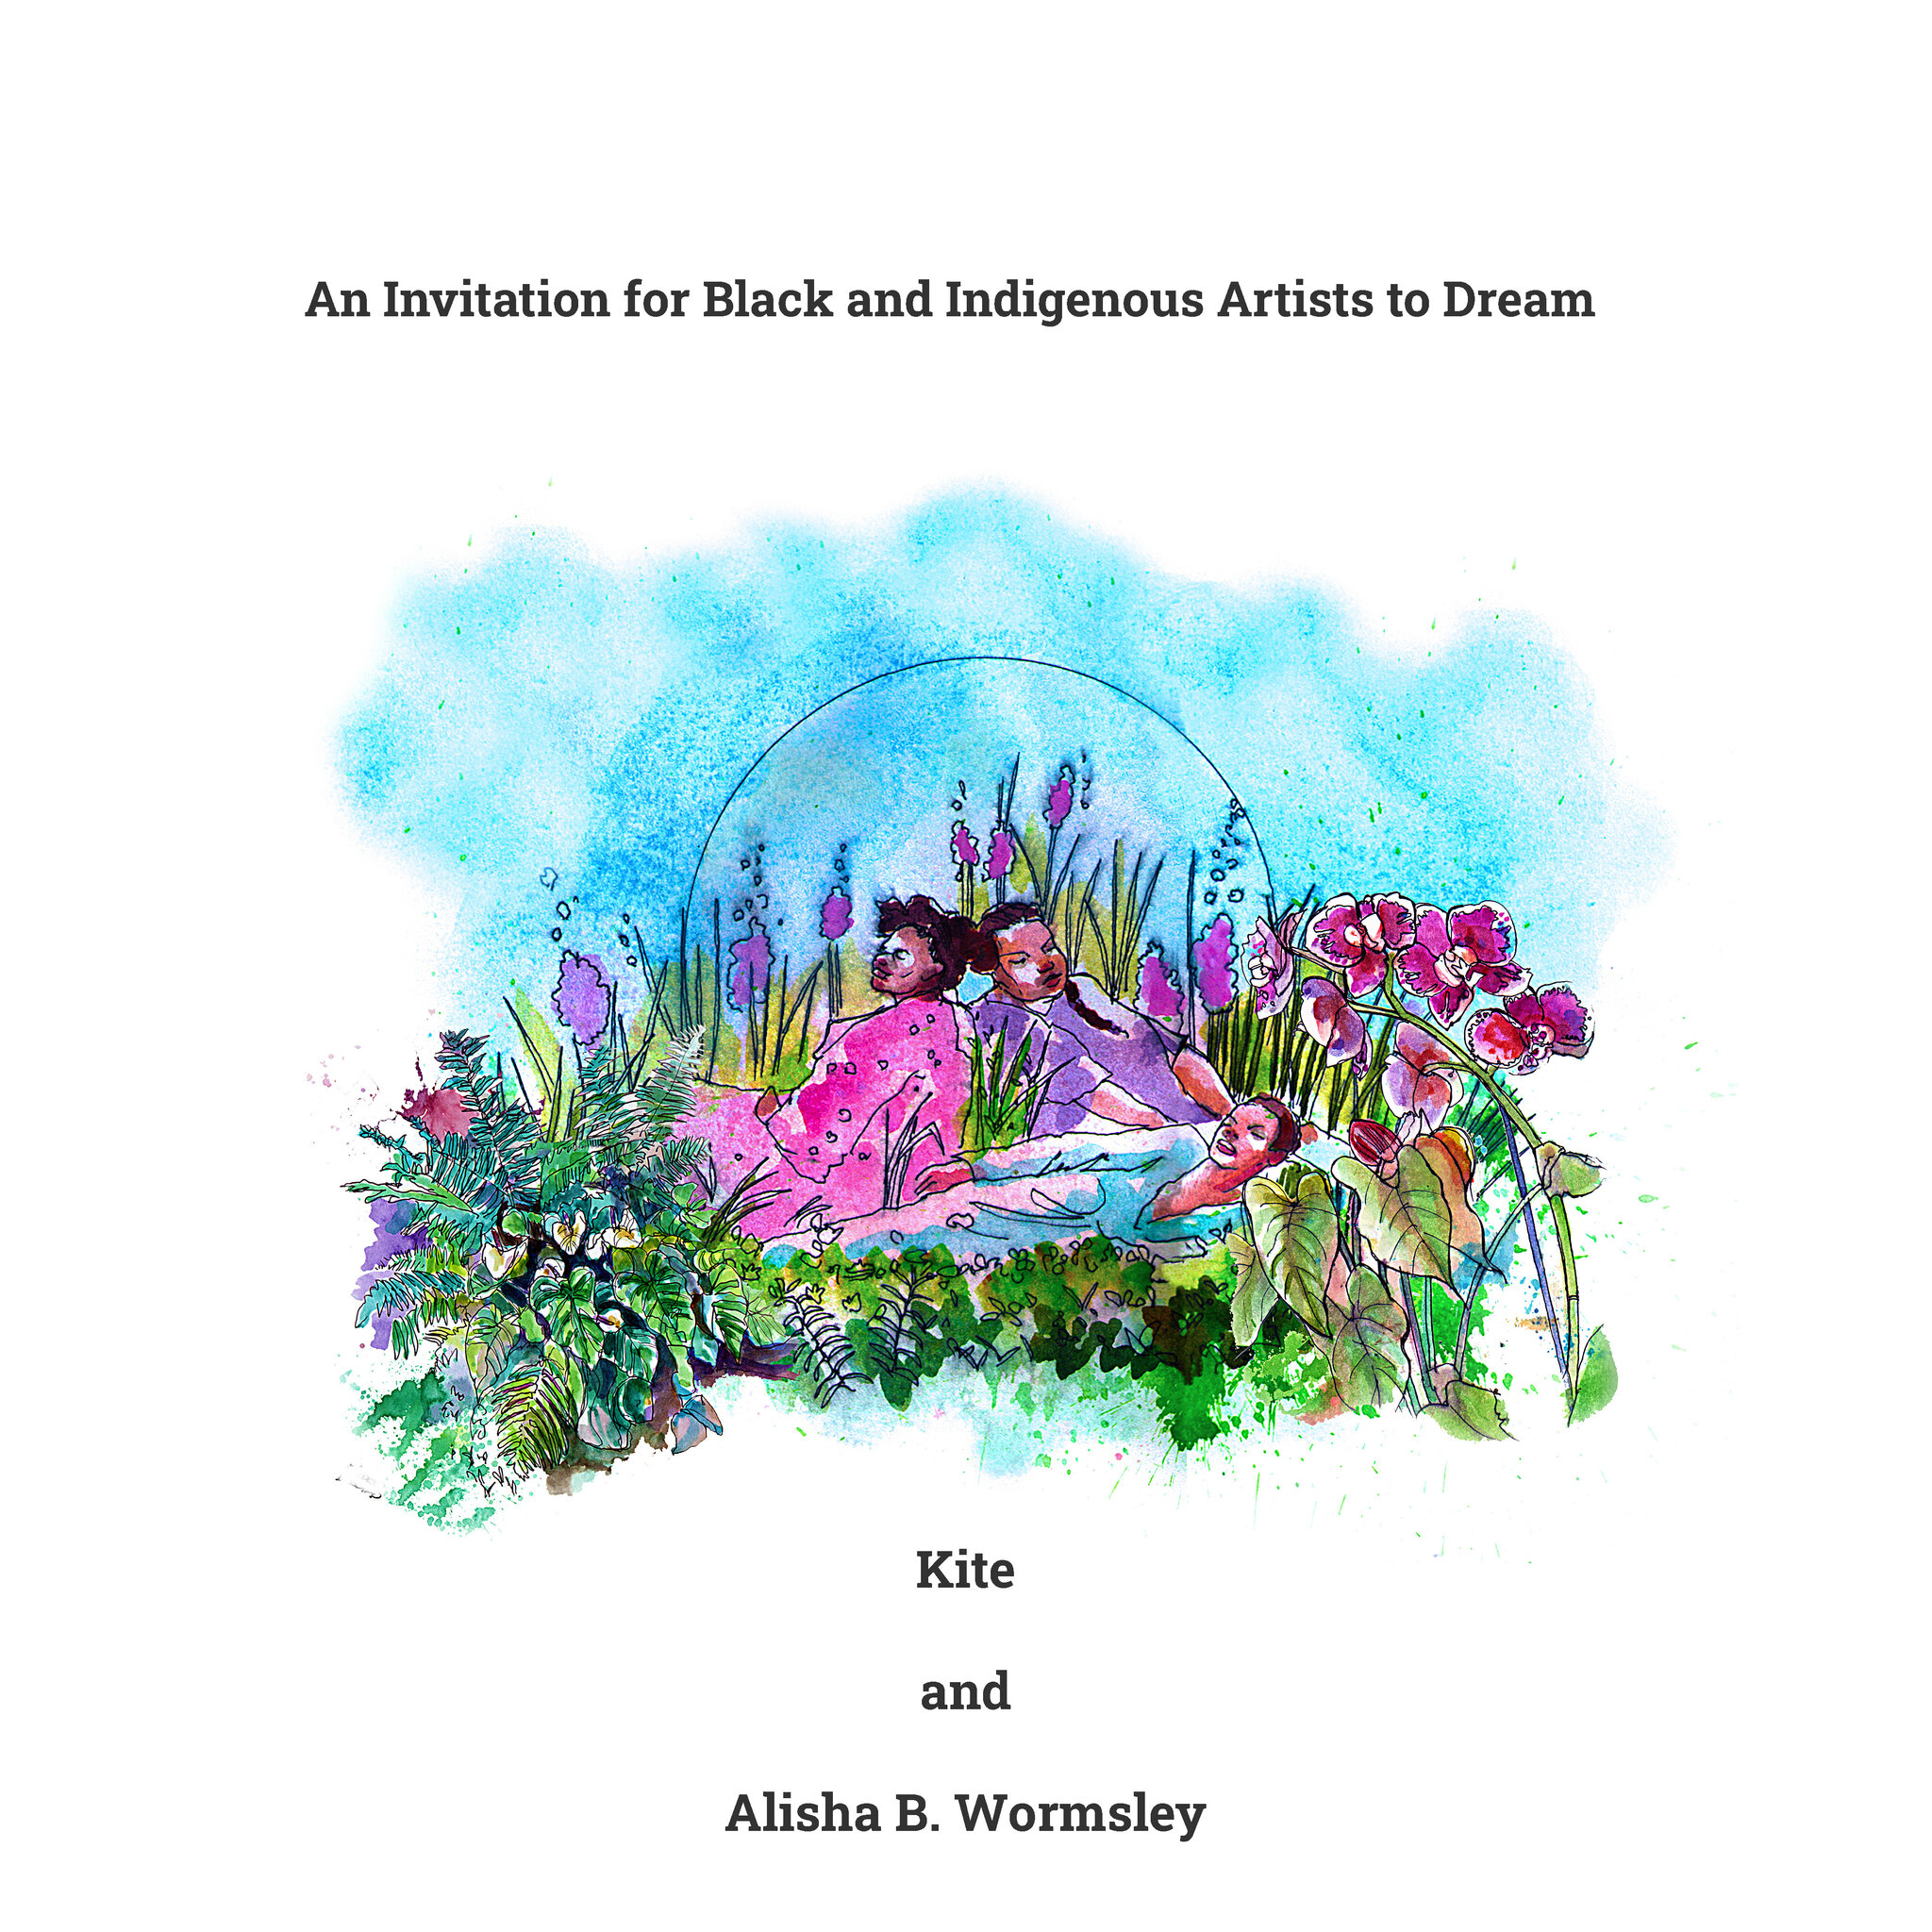 Kite and Alisha B Wormsley, "An Invitation for Black and Indigenous Artists to Dream", 2021